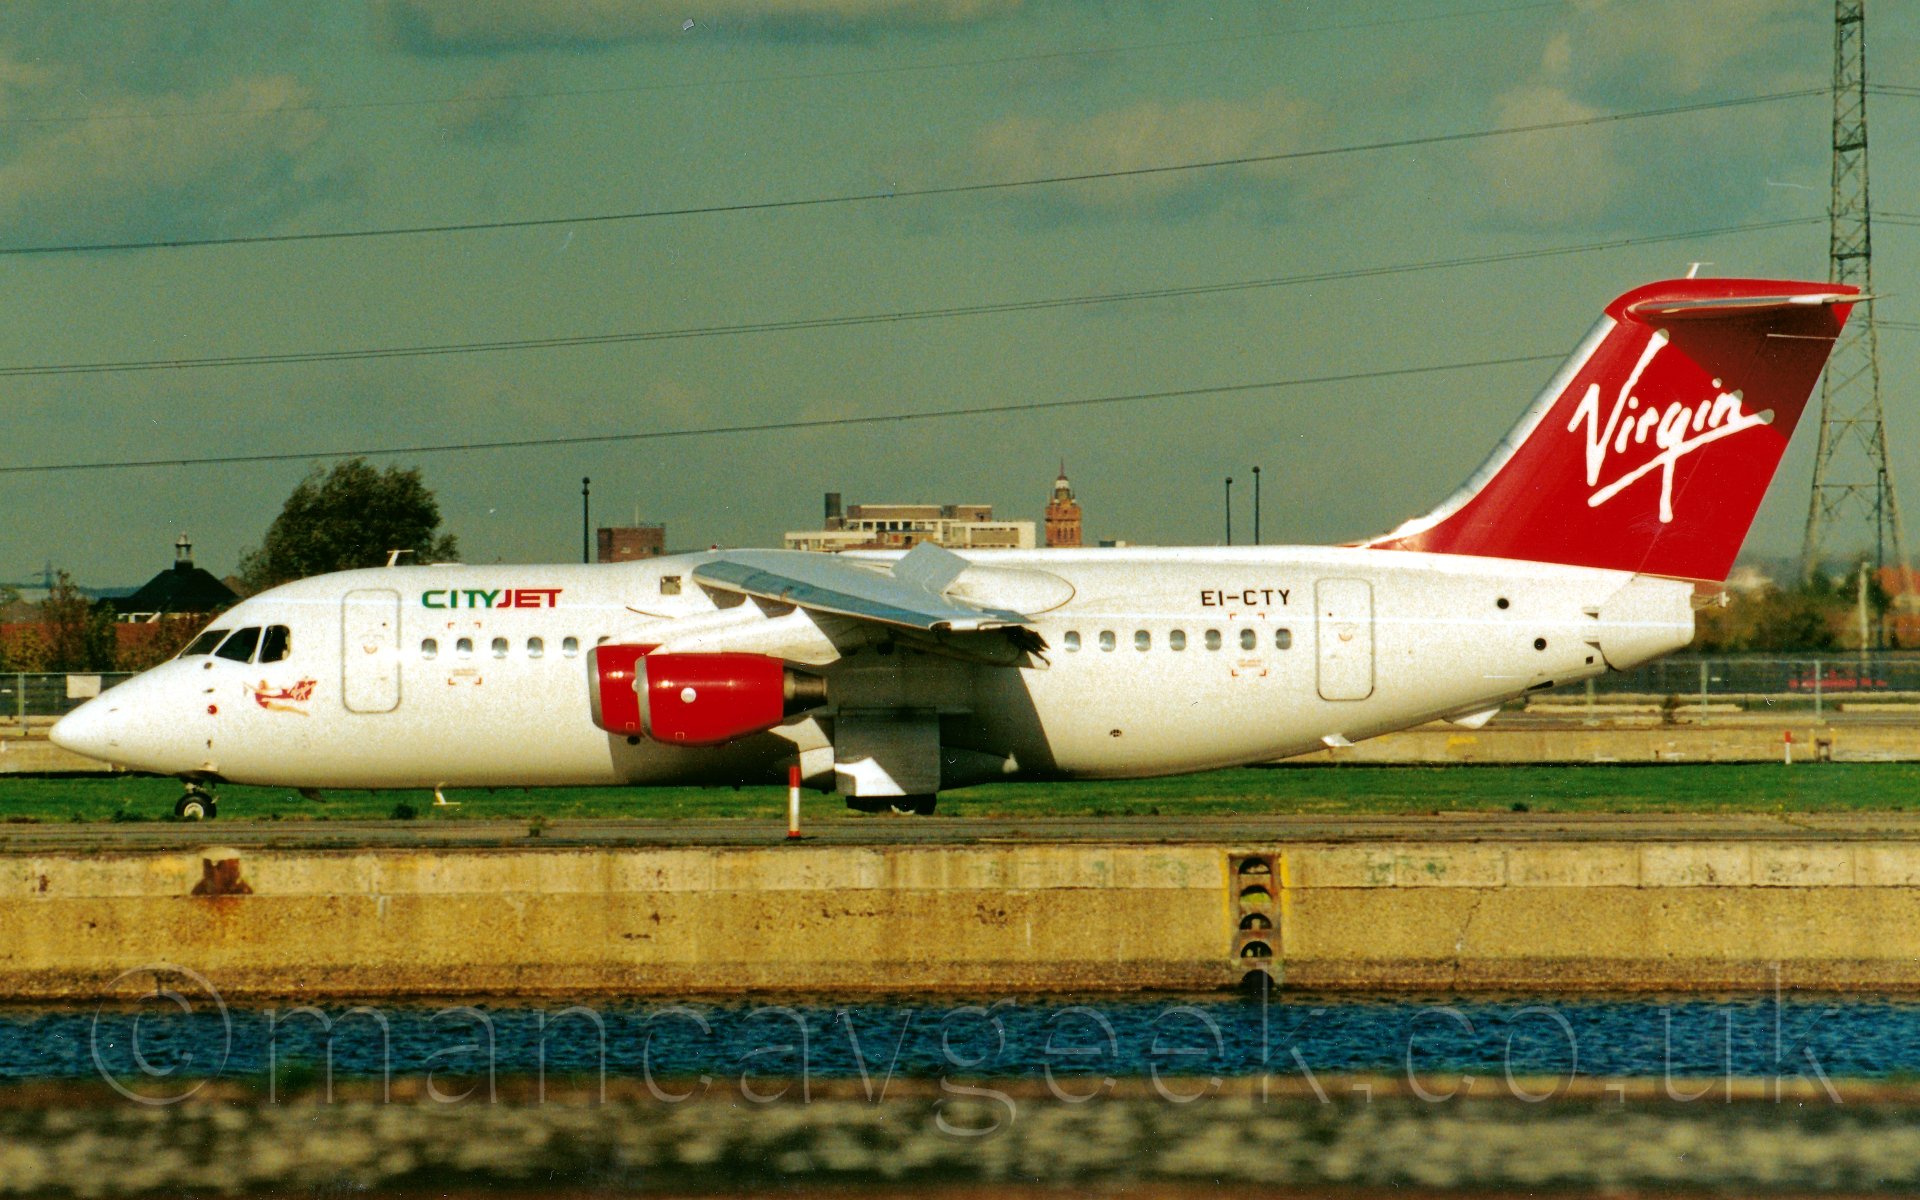 Side view of a high-winged, 4 engined jet airliner taxiing from right to left. The plane is mostly white, with green and red "CITYJET" titles on the upper forward fuselage, and an image of a flying woman weraing a red leotard and holding a red flag with the word "Virgin" written on it. The tail is red, with the word "Virgin" in the middle. The engine pods are also red. The registration "EI-CTY" is on the upper rear fuselage in black. In the foreground, a body of water can be seen, several metres below the level of the taxiway. In the background, green grass leads up to fences at the wirfield perimeter, with cars driving past on a nearby road, and houses and other buildings beyond that, under a blue-grey sky.